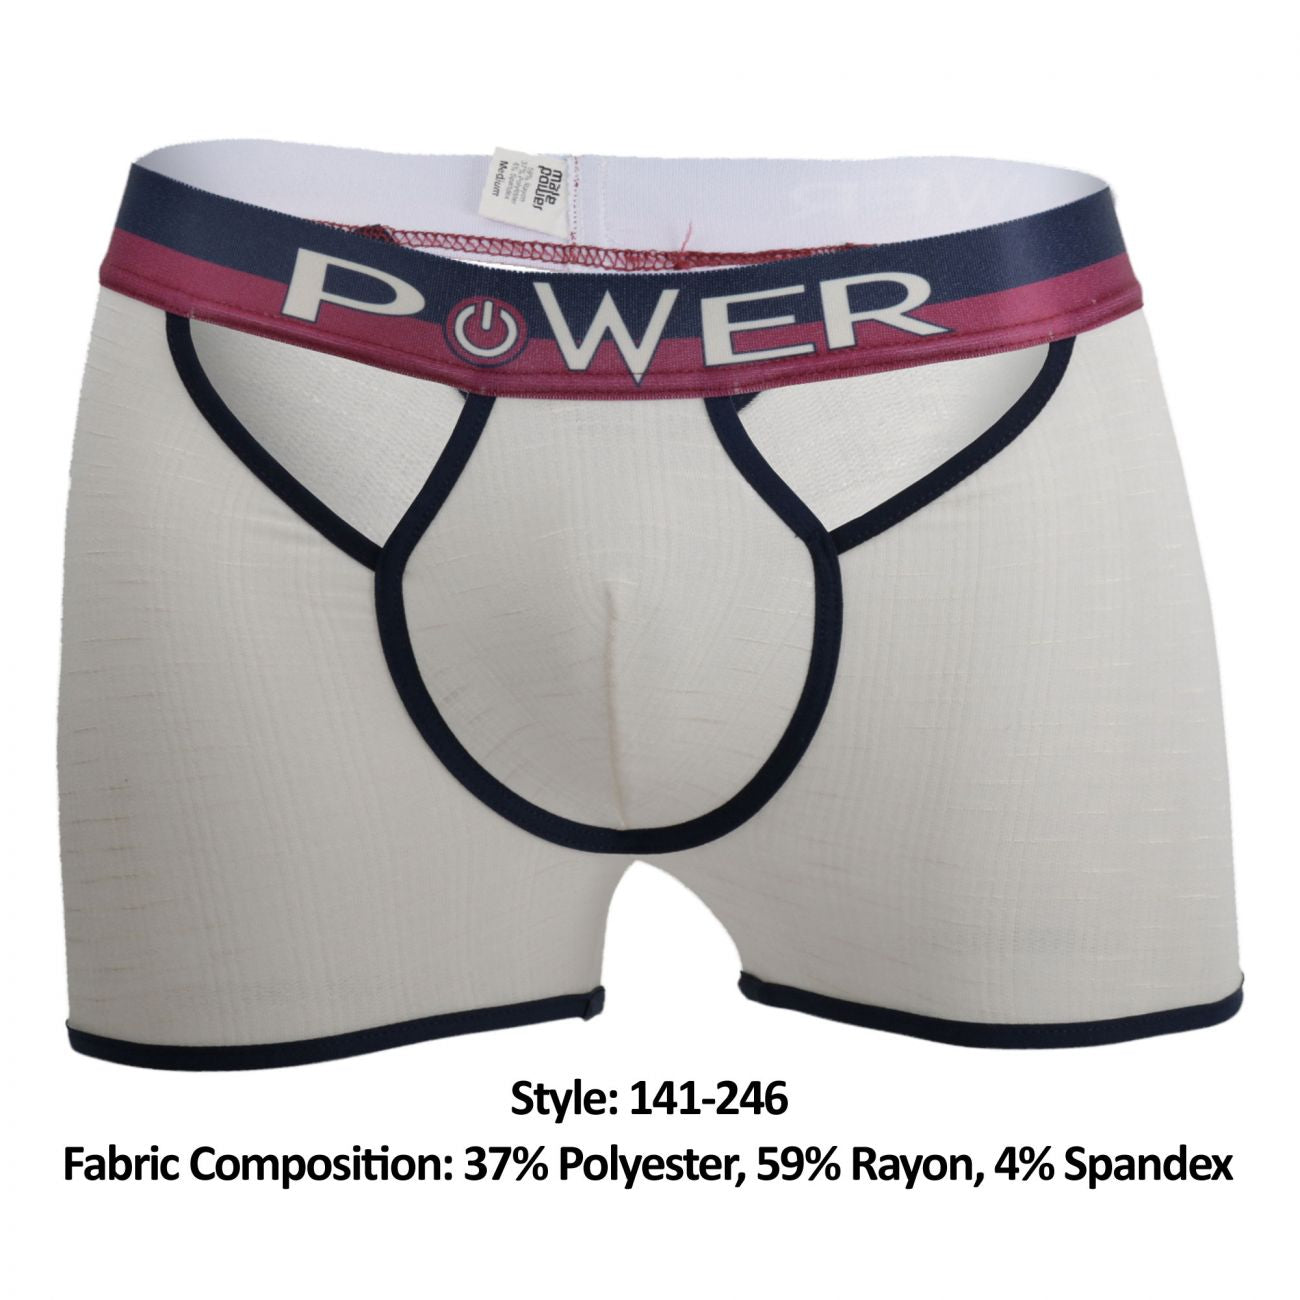 Male Power 141-246 French Terry Cutout Short